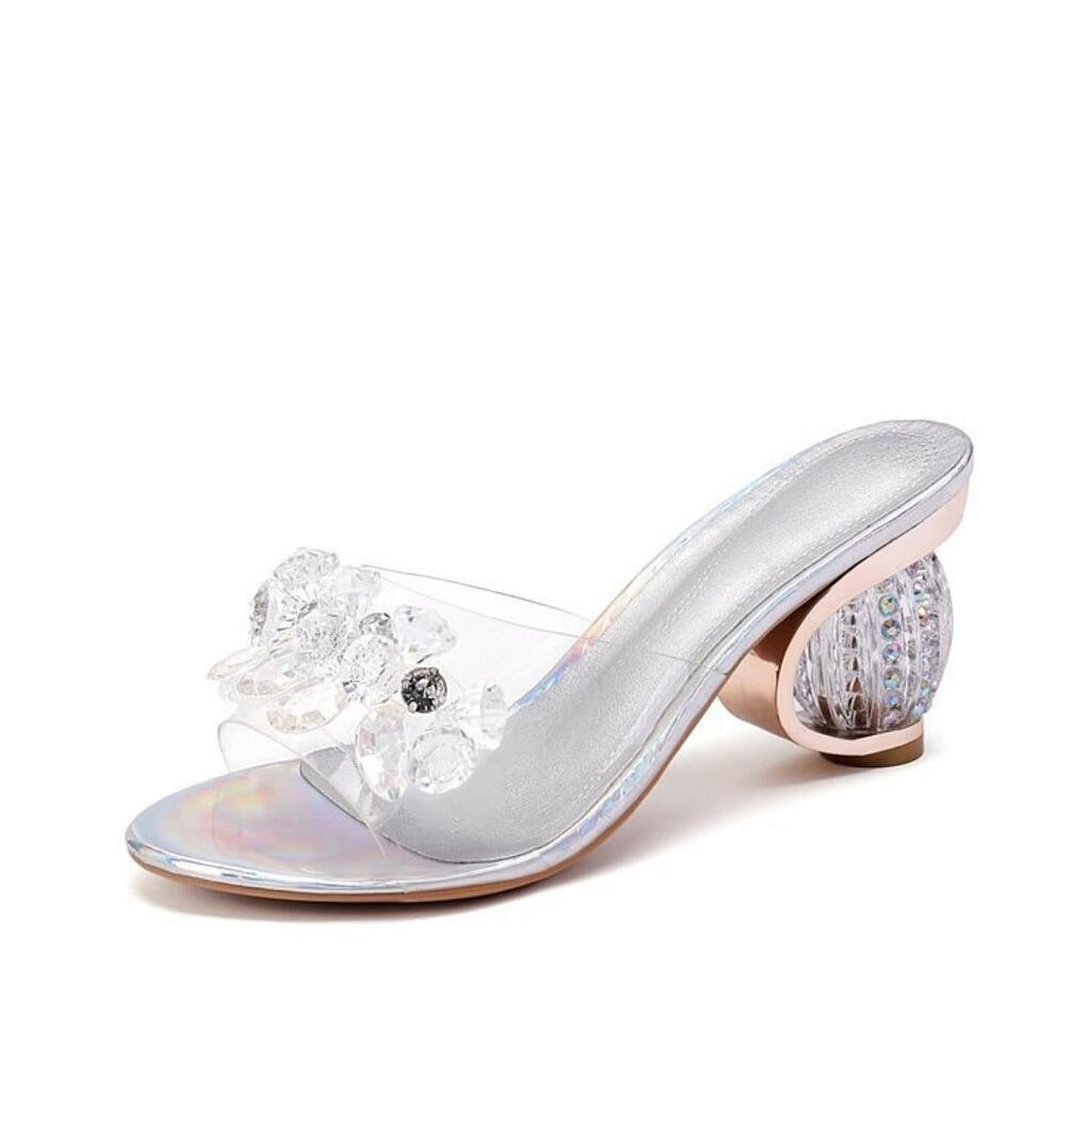 Women Sandals Crystal Transparent Jelly Shoes Summer Woman Open Toe Strange Heels Ladies High Heels Fashion Female Slippers New